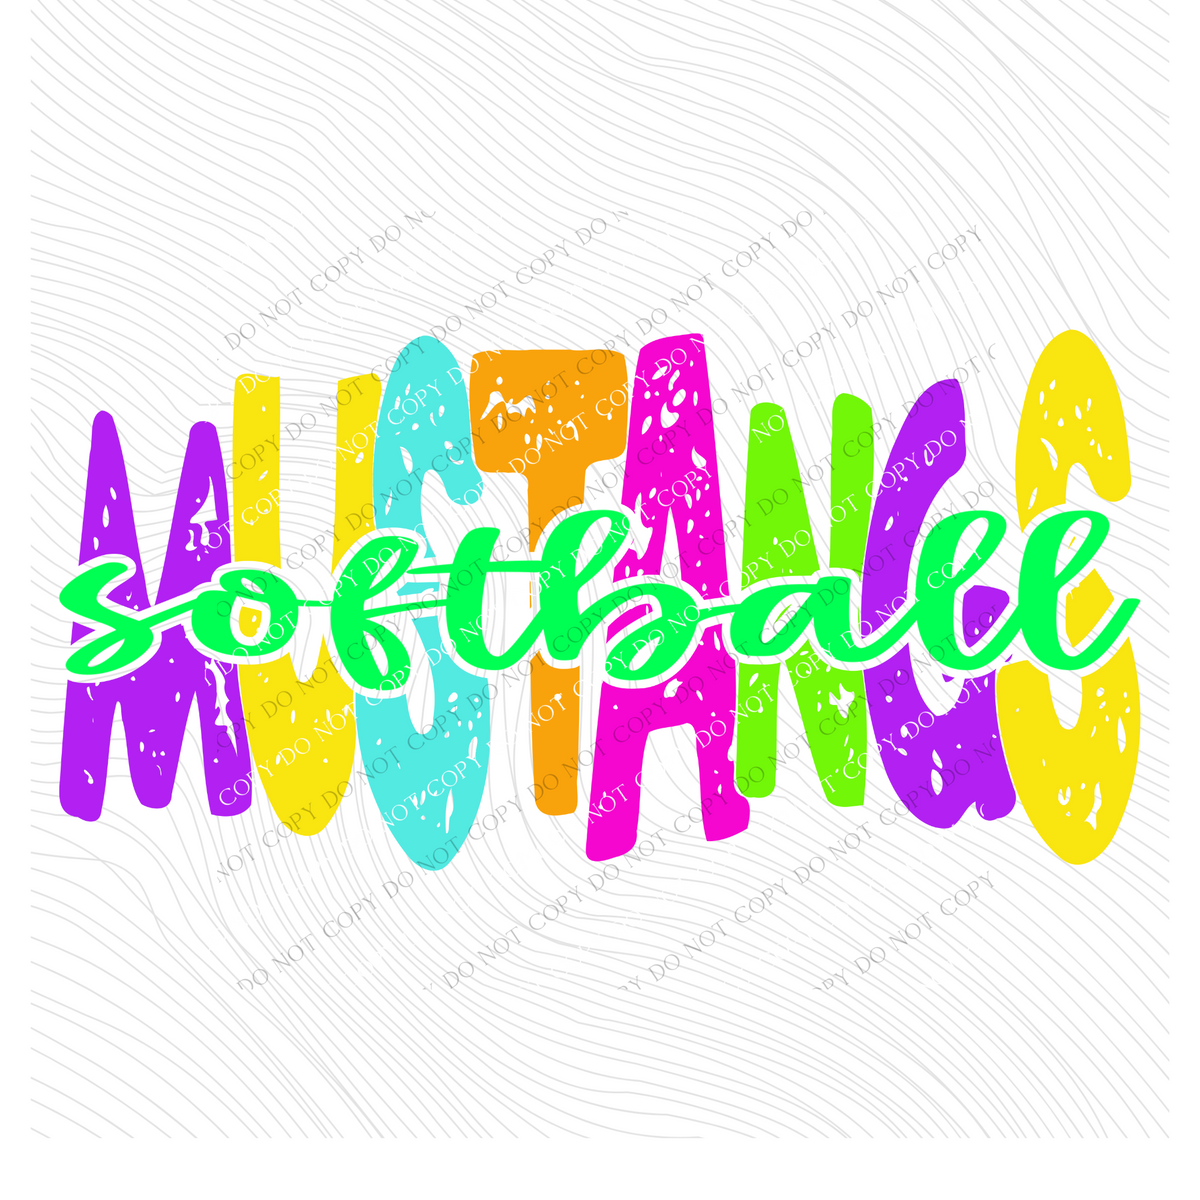 Mustangs Distressed Blank, Cutout Softball, Baseball & Volleyball in Neons all Included Digital Design, PNG